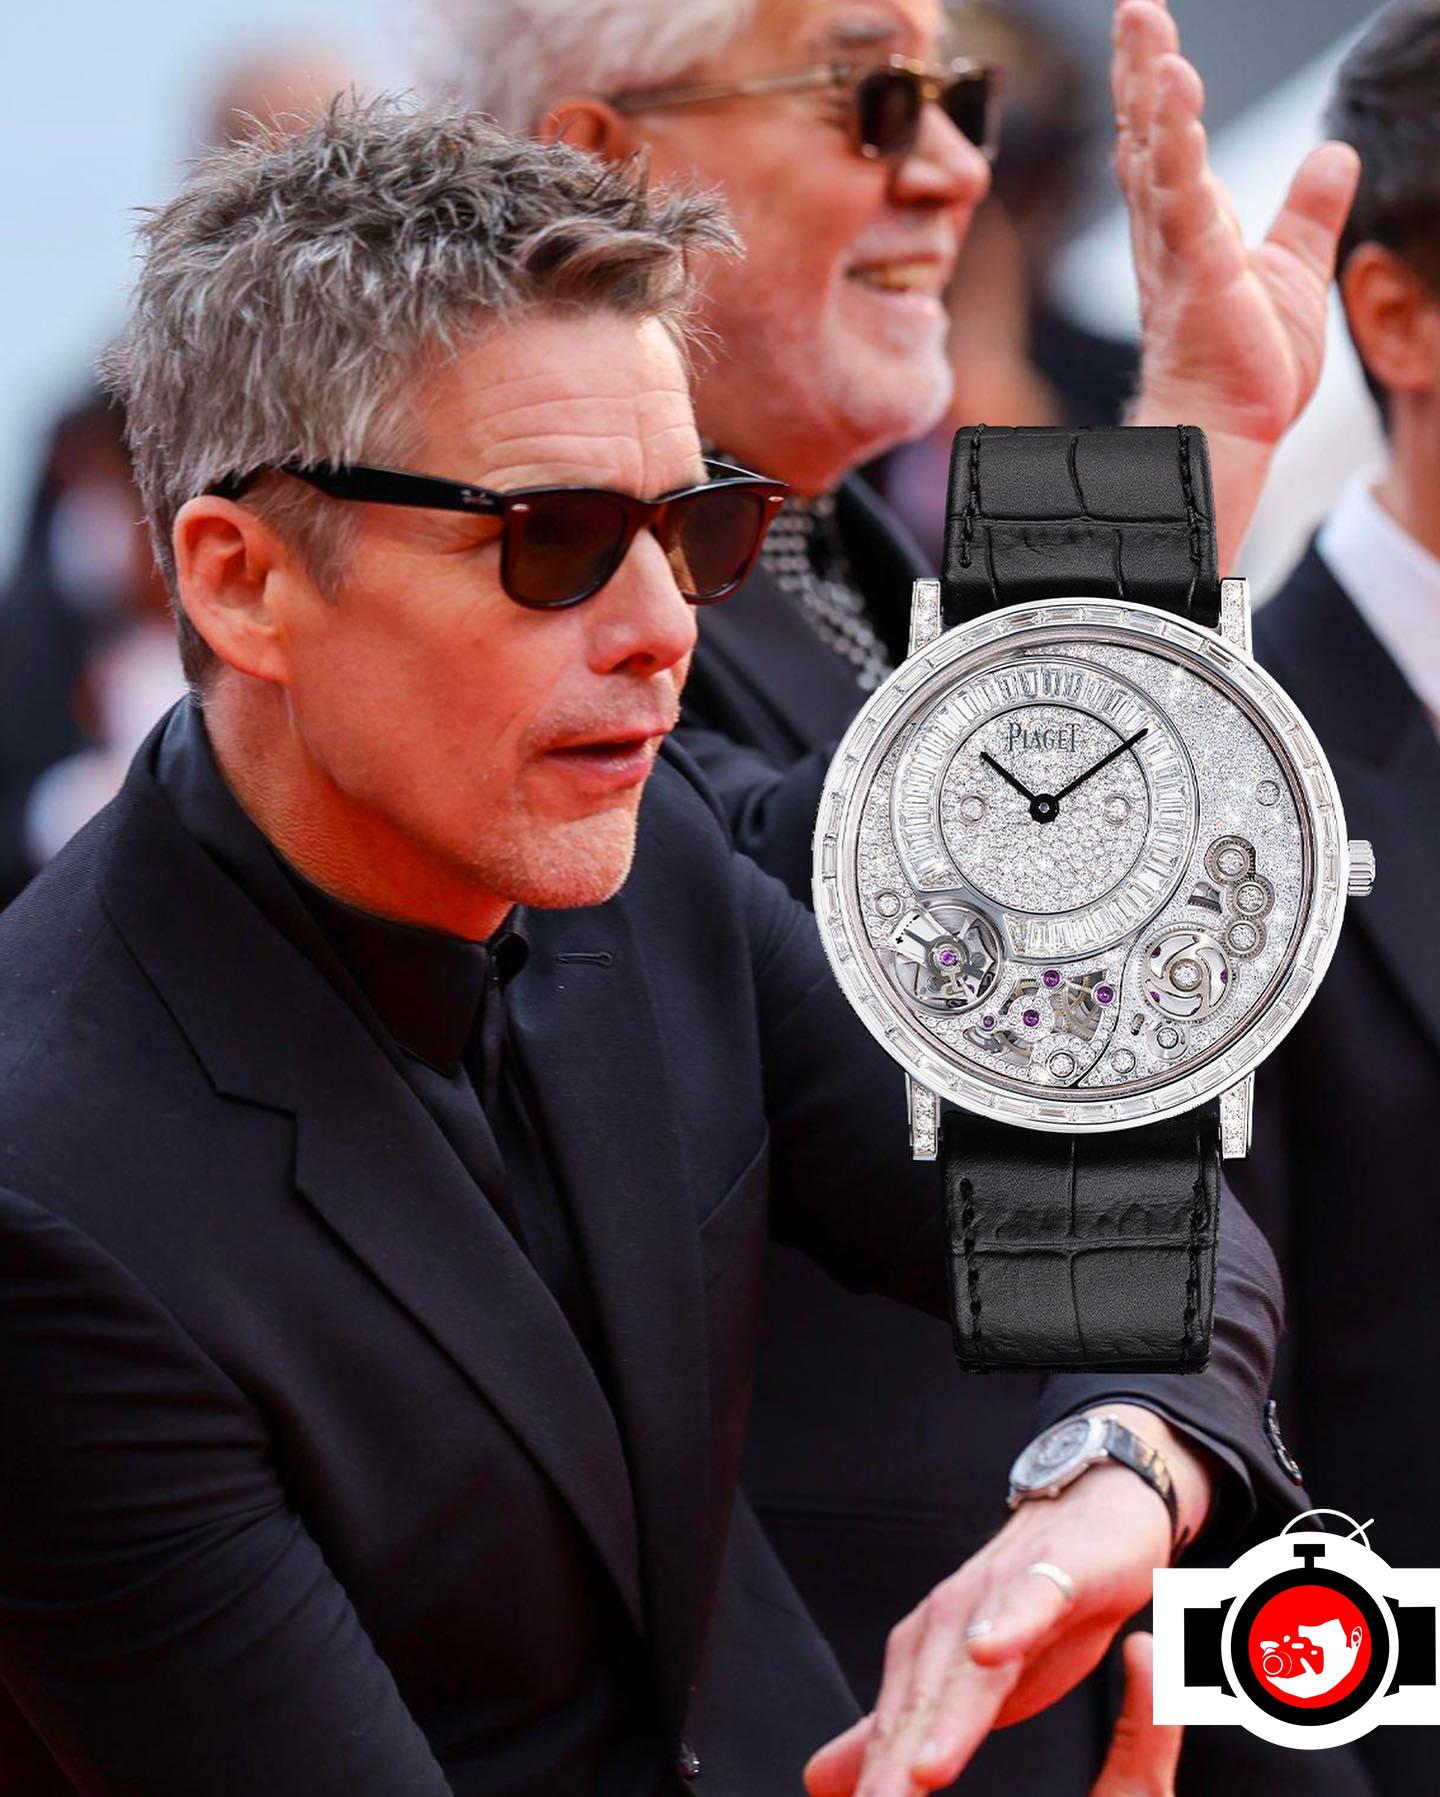 actor Ethan Hawke spotted wearing a Piaget 